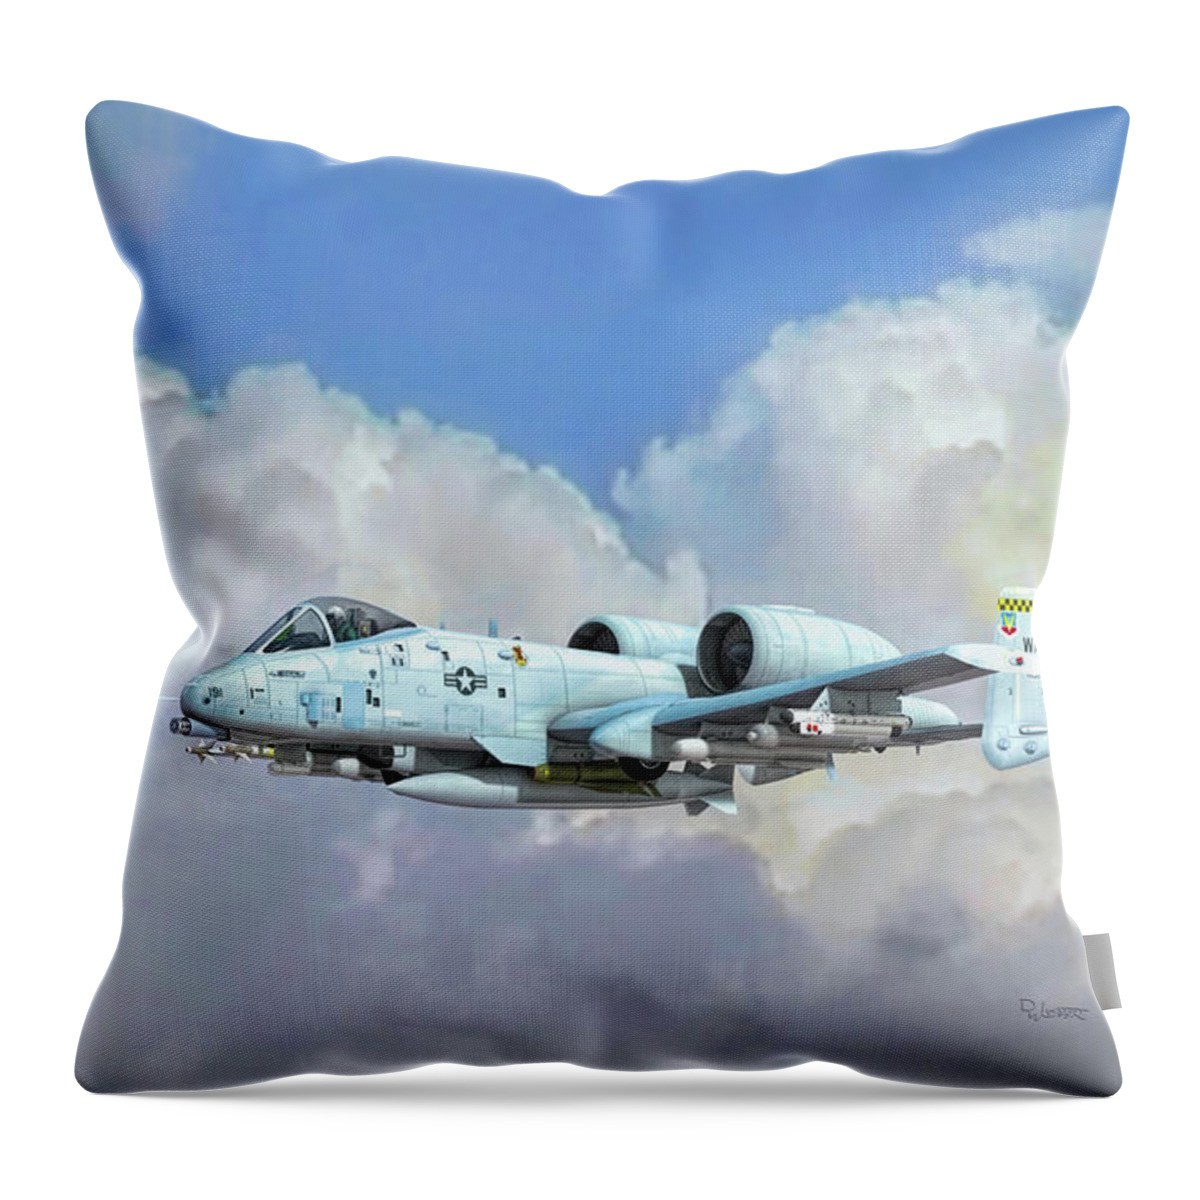 A-10 Throw Pillow featuring the digital art Lethal Weapon by David Luebbert